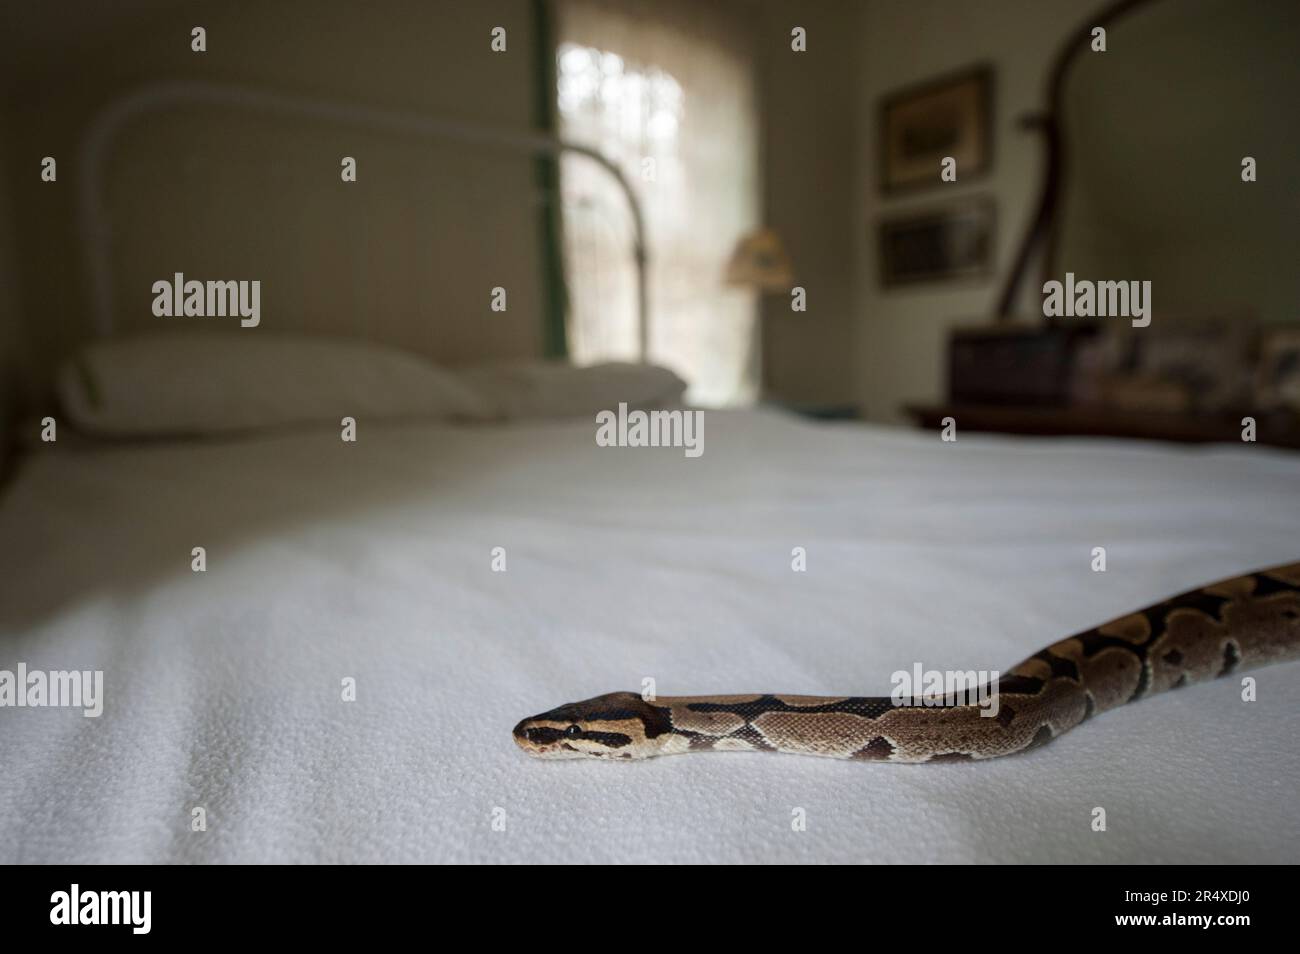 Ball python (Python regius) on a bed in a bedroom; Lincoln, Nebraska, United States of America Stock Photo